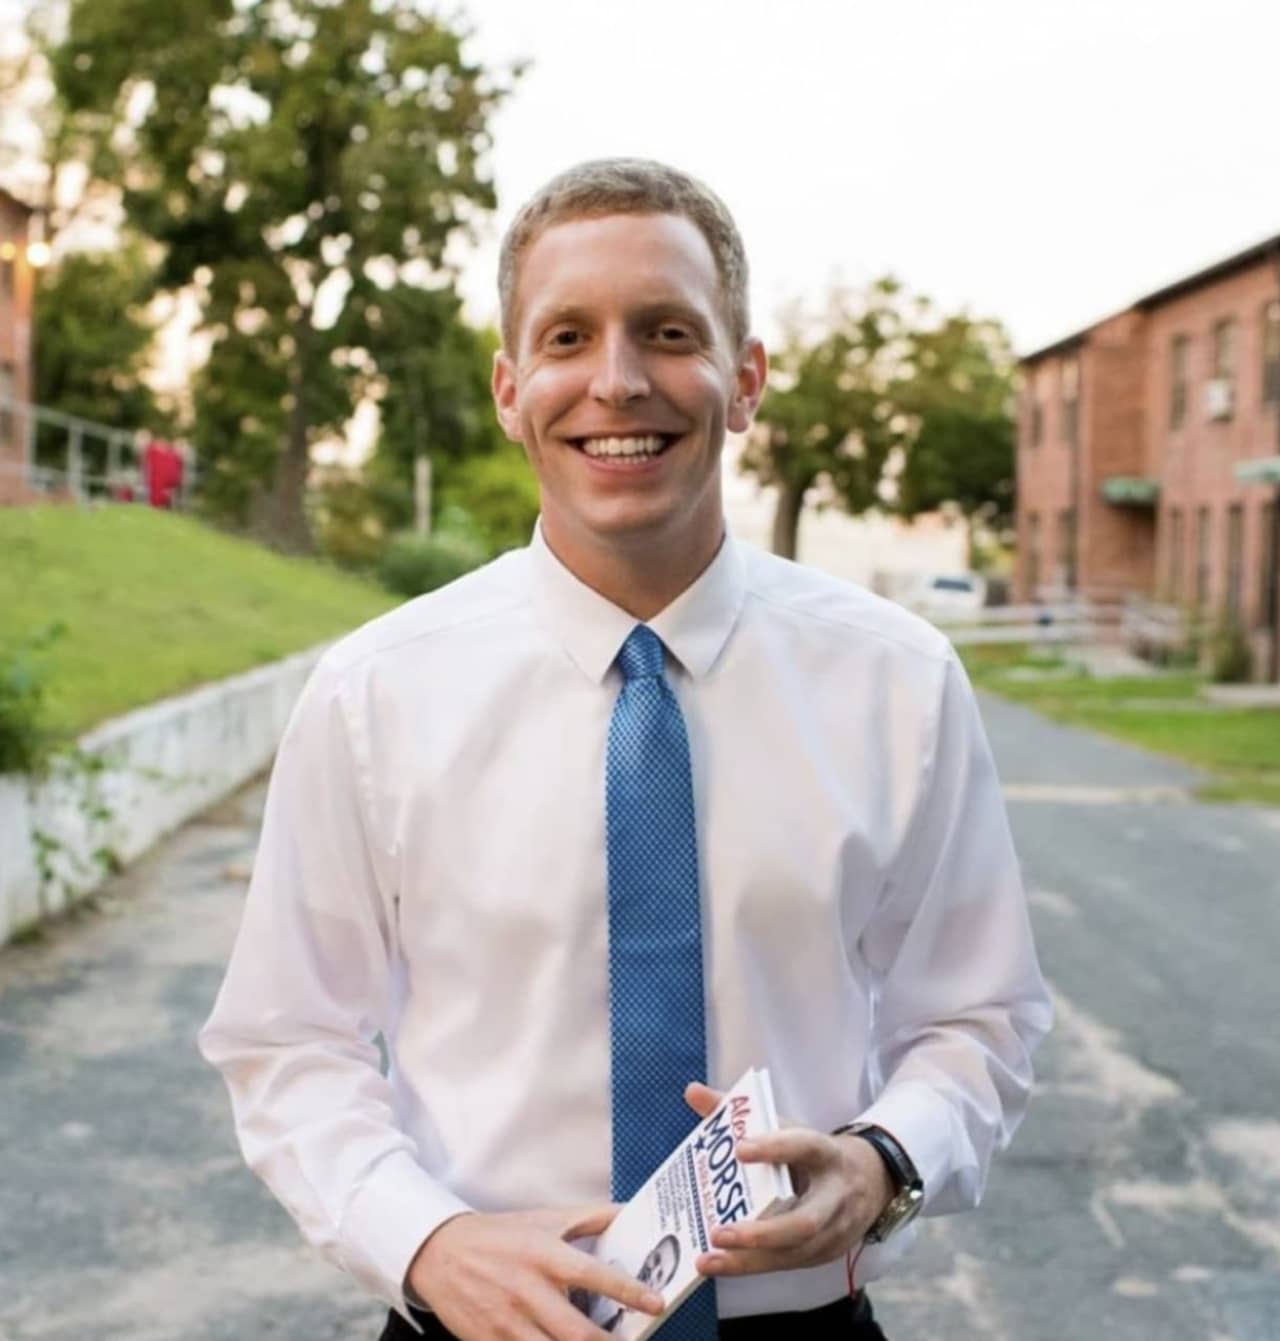 Holyoke Mayor Alex Morse has joined a small group of mayors who are dedicated to investigating how "universal basic income" would impact their communities.